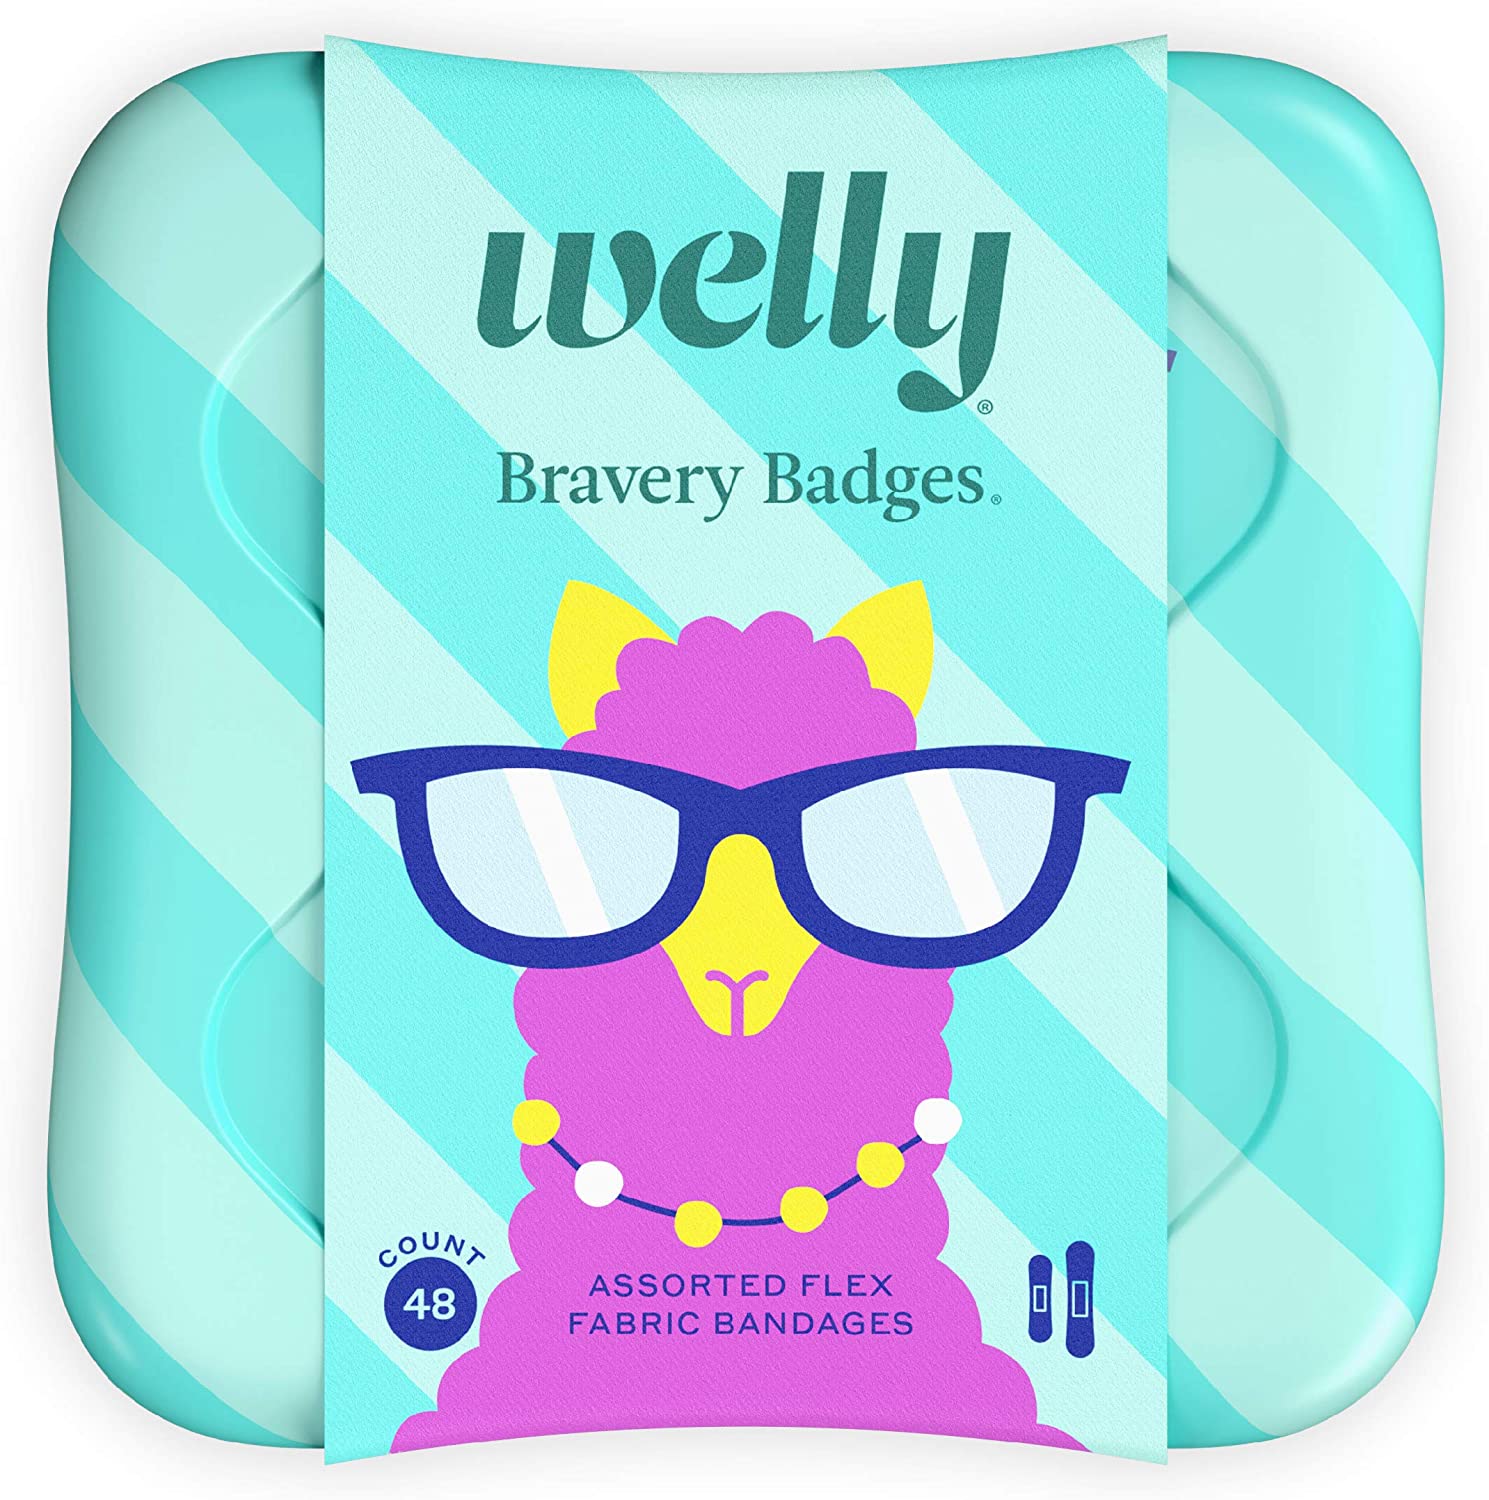 Welly Latex-Free Kids’ Bandages, 48-Count